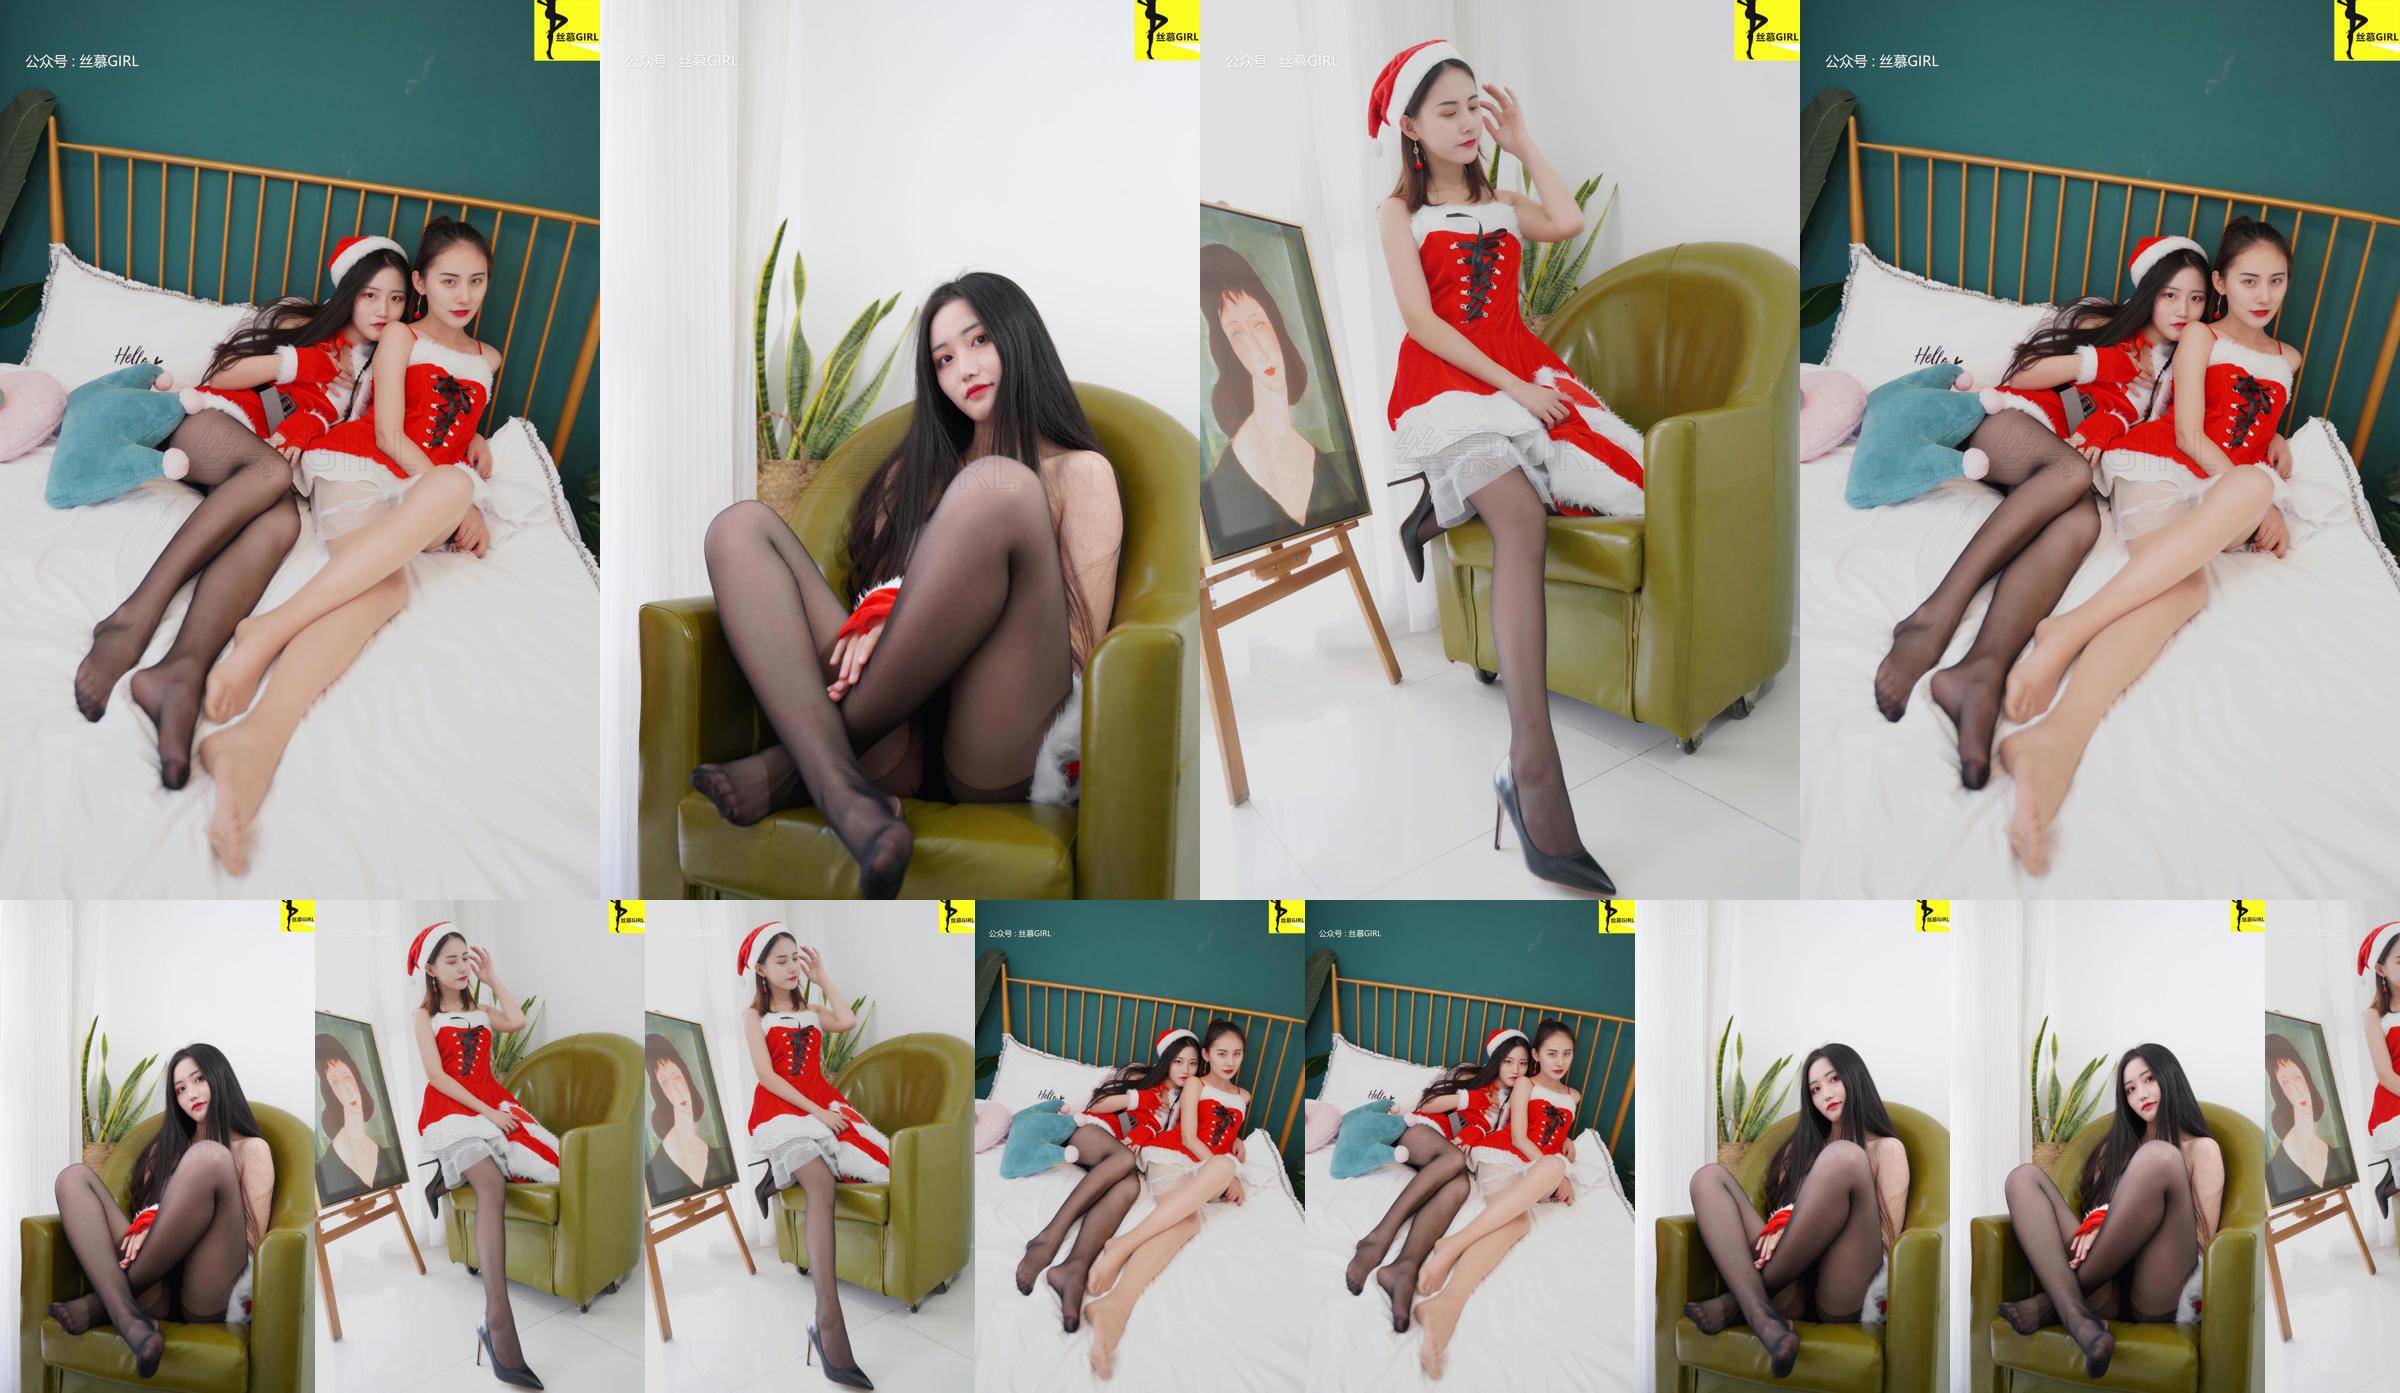 [Simu] Issue 041 Tingyi & Shuangshuang "Christmas Special" No.df793a Page 4